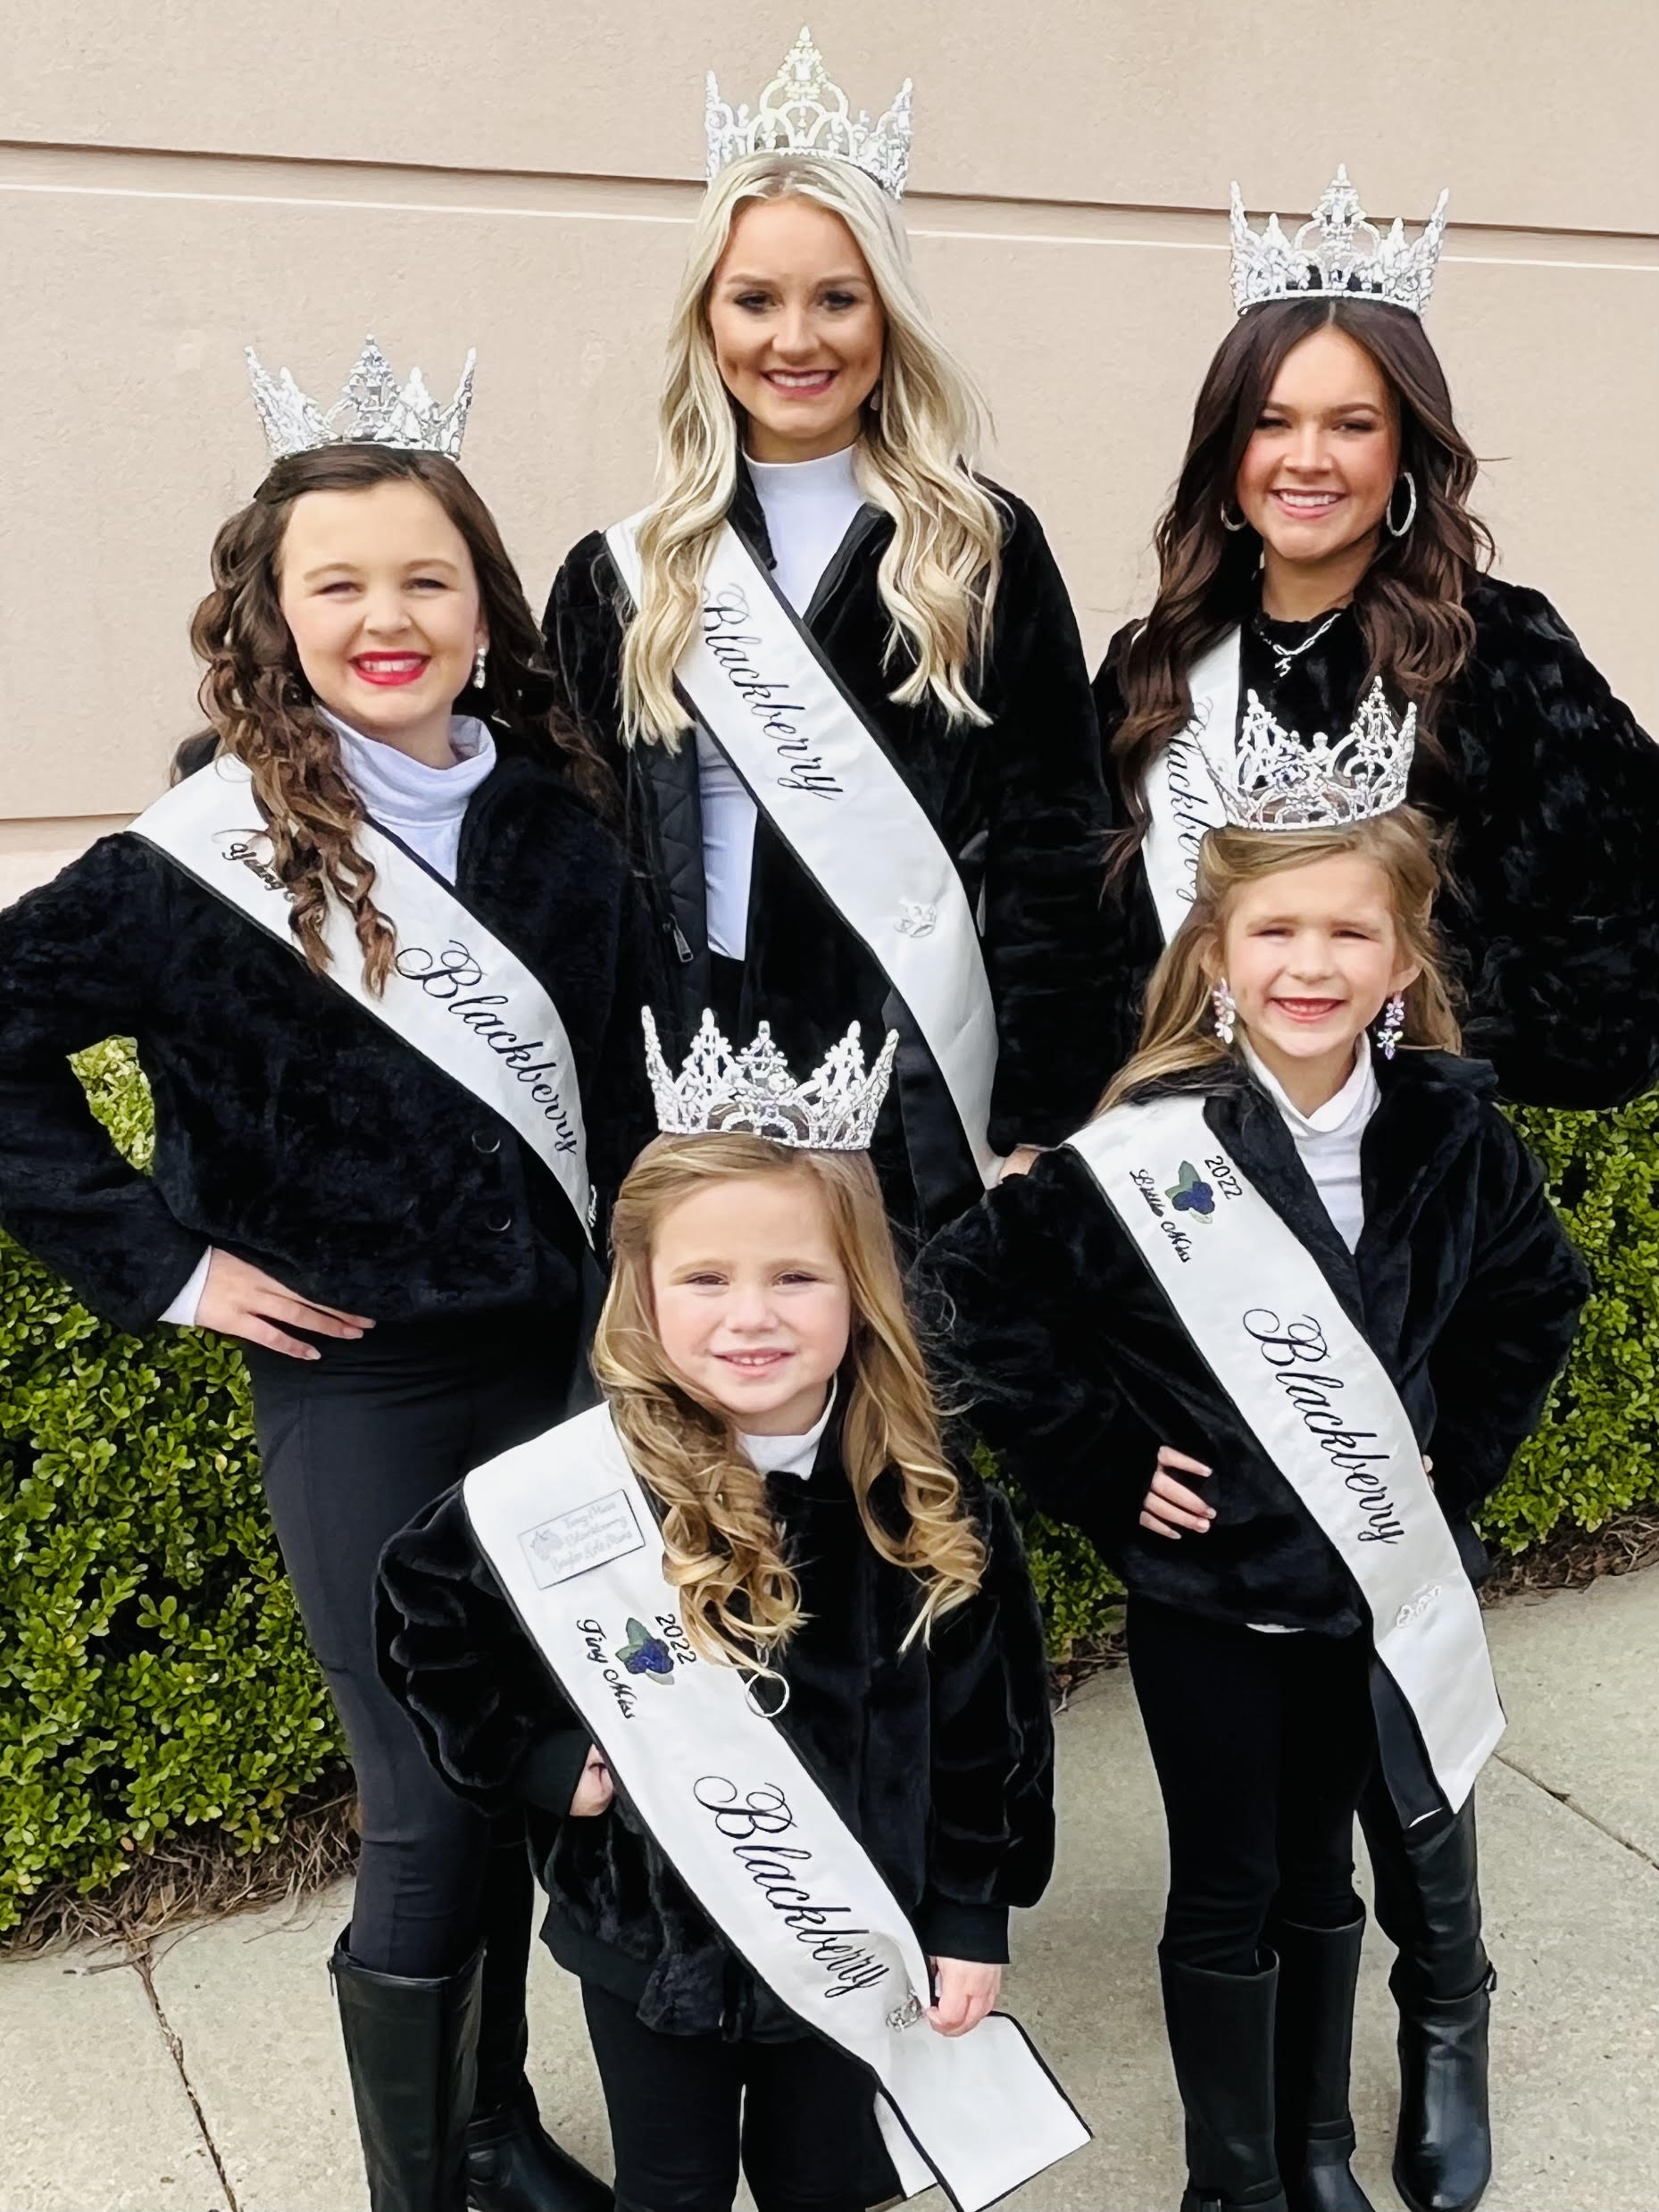 2022 Miss Blackberry Queens Miss Blackberry Karlee Cummings, Junior Miss Maryjane Cole, Young Miss Elizabeth Eason, Little Miss Carolina Thrash and Tiny Miss Bayler Kole Mims participated in the governor’s Inauguration Parade. (PAMELA DEAVERS | CONTRIBUTED)